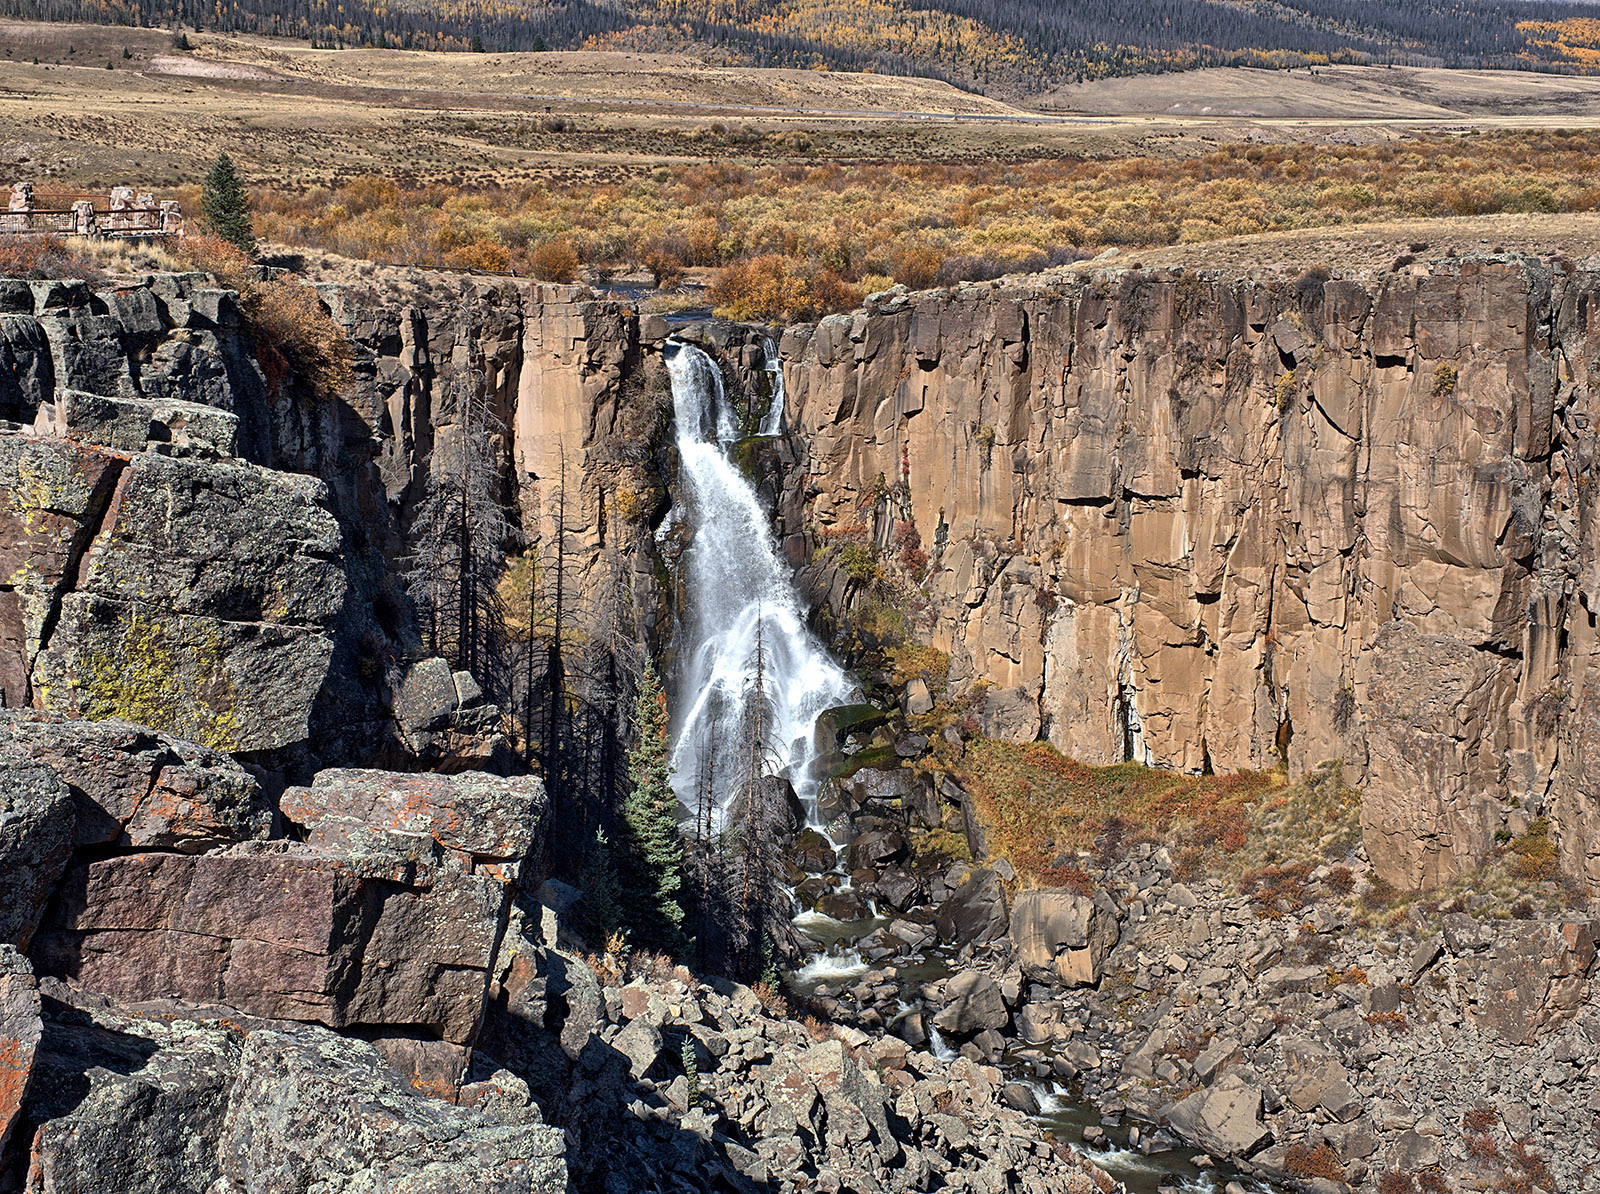 North Clear Creak Falls over Nelson Mountain Tuff which originated from a volcanic eruption 27 Ma.